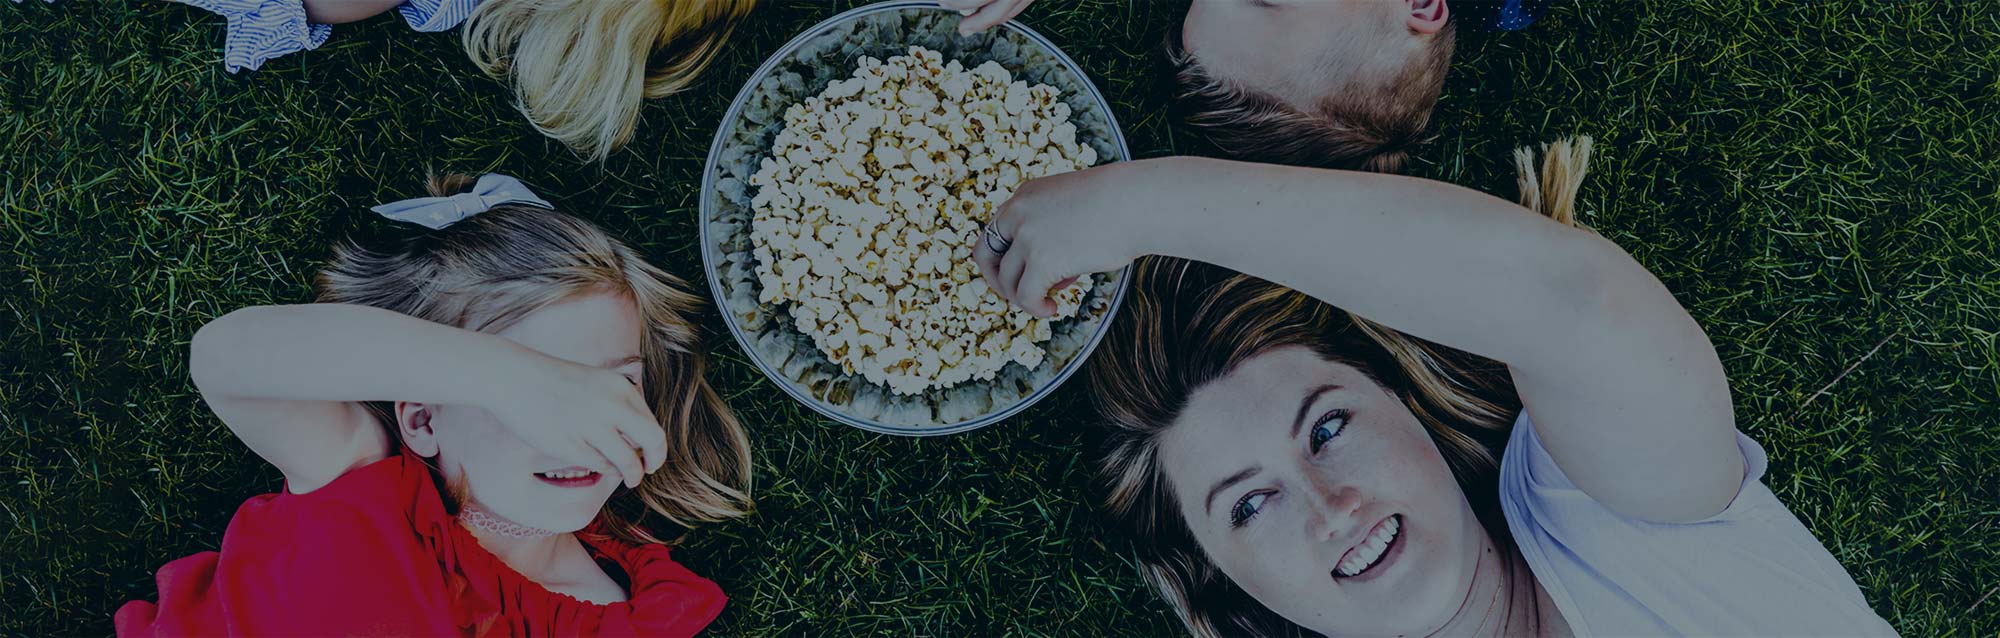 Children lying on their backs in a circle on the grass reach overhead and into a bowl of popcorn that is between them.